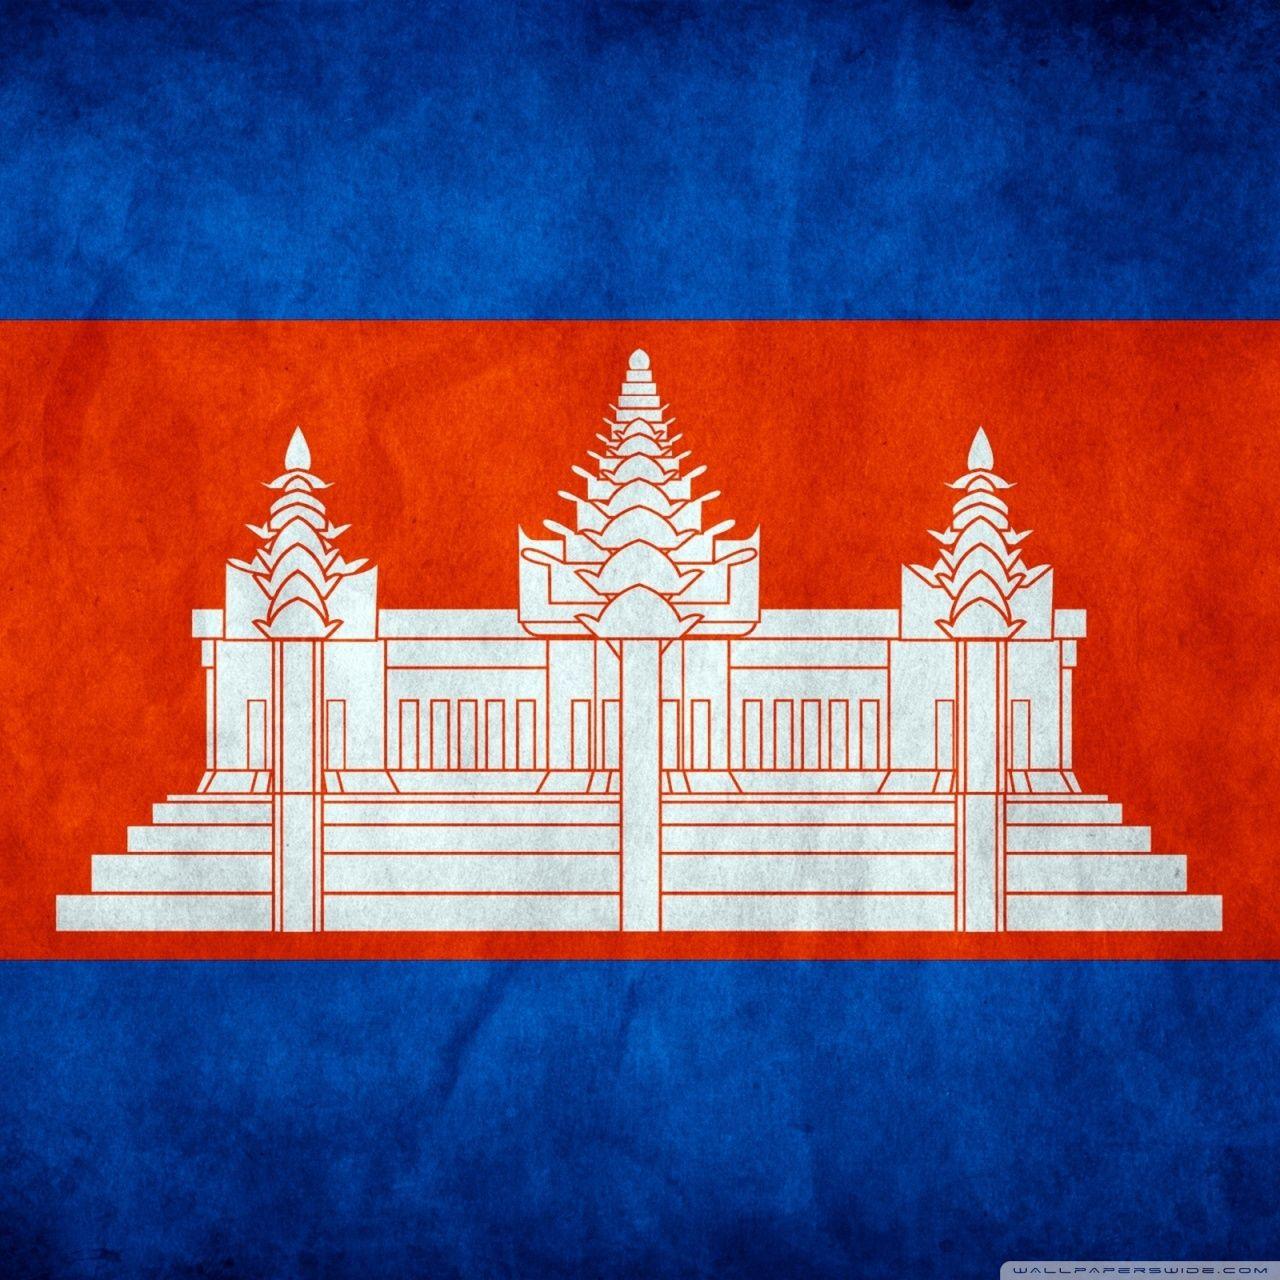  Cambodia  Wallpapers  Wallpaper  Cave